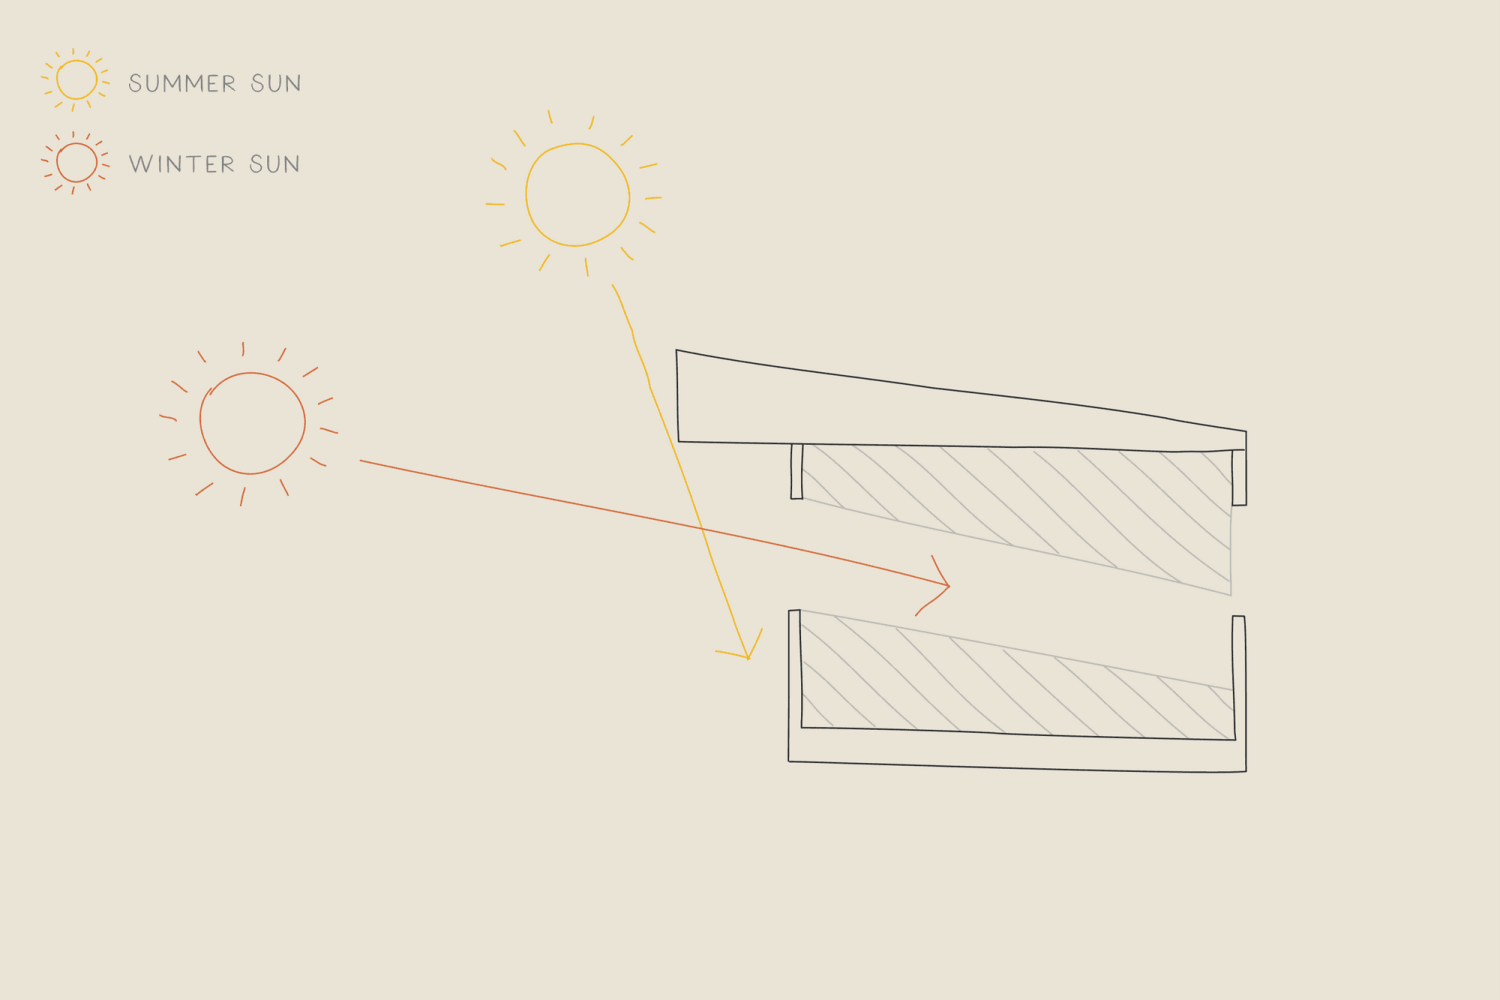 From our subtropical homes guide: This diagram illustrates how a north-facing roof overhang will shade glass in the Summer and also allow deep sunlight into the interior for warmth, when the sun’s path is lower during the Winter months.